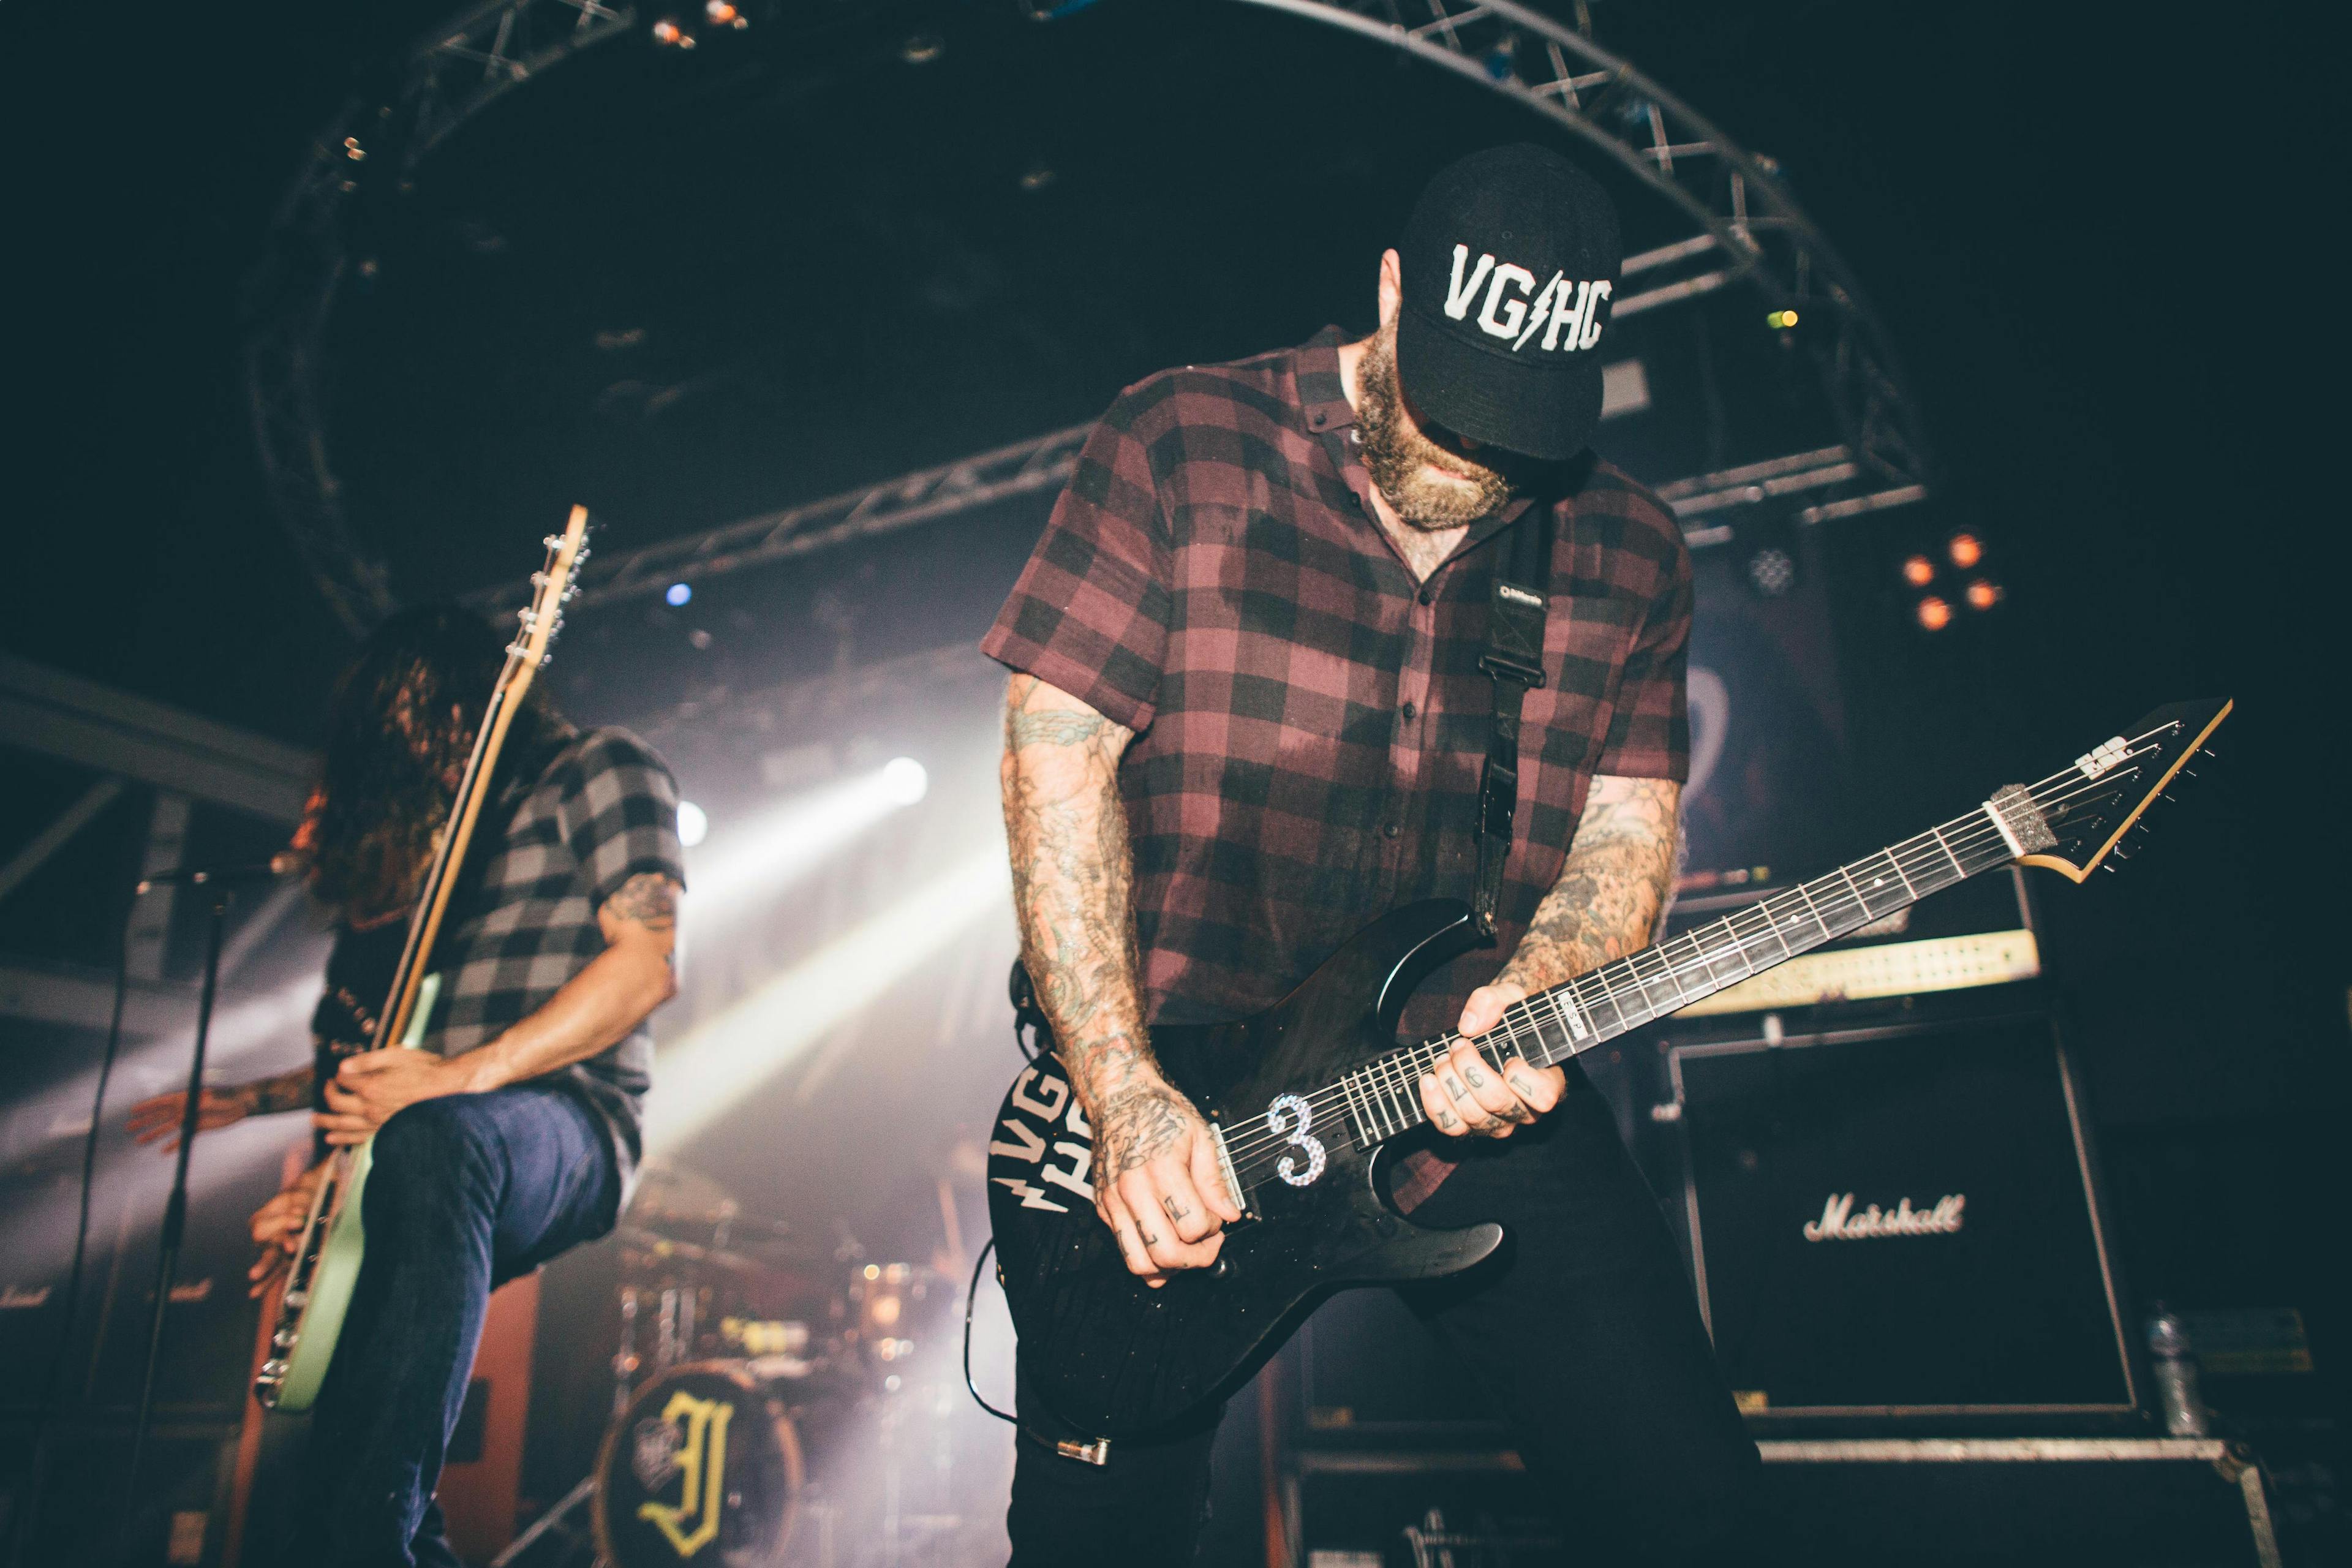 Check out this Every Time I Die tour gallery